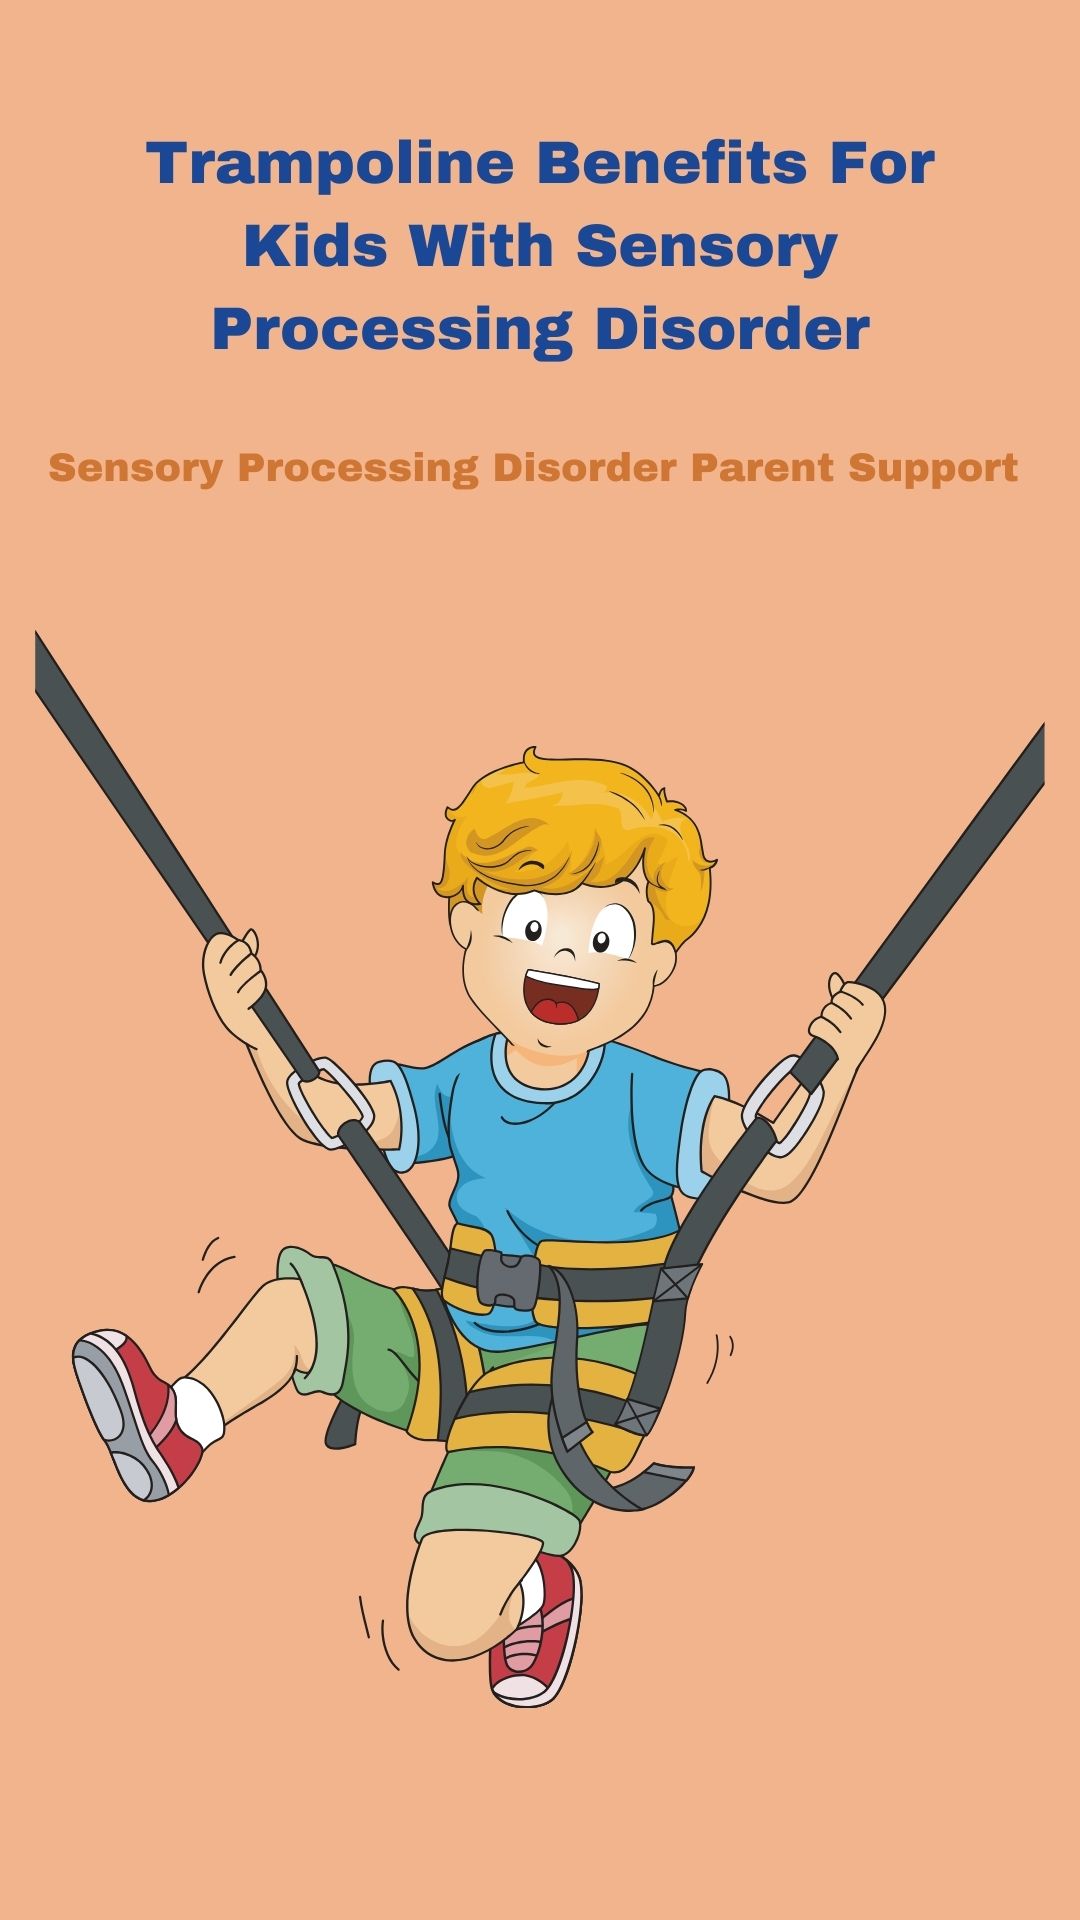 boy with sensory processing disorder on trampoline Trampoline Benefits For Kids With SPD